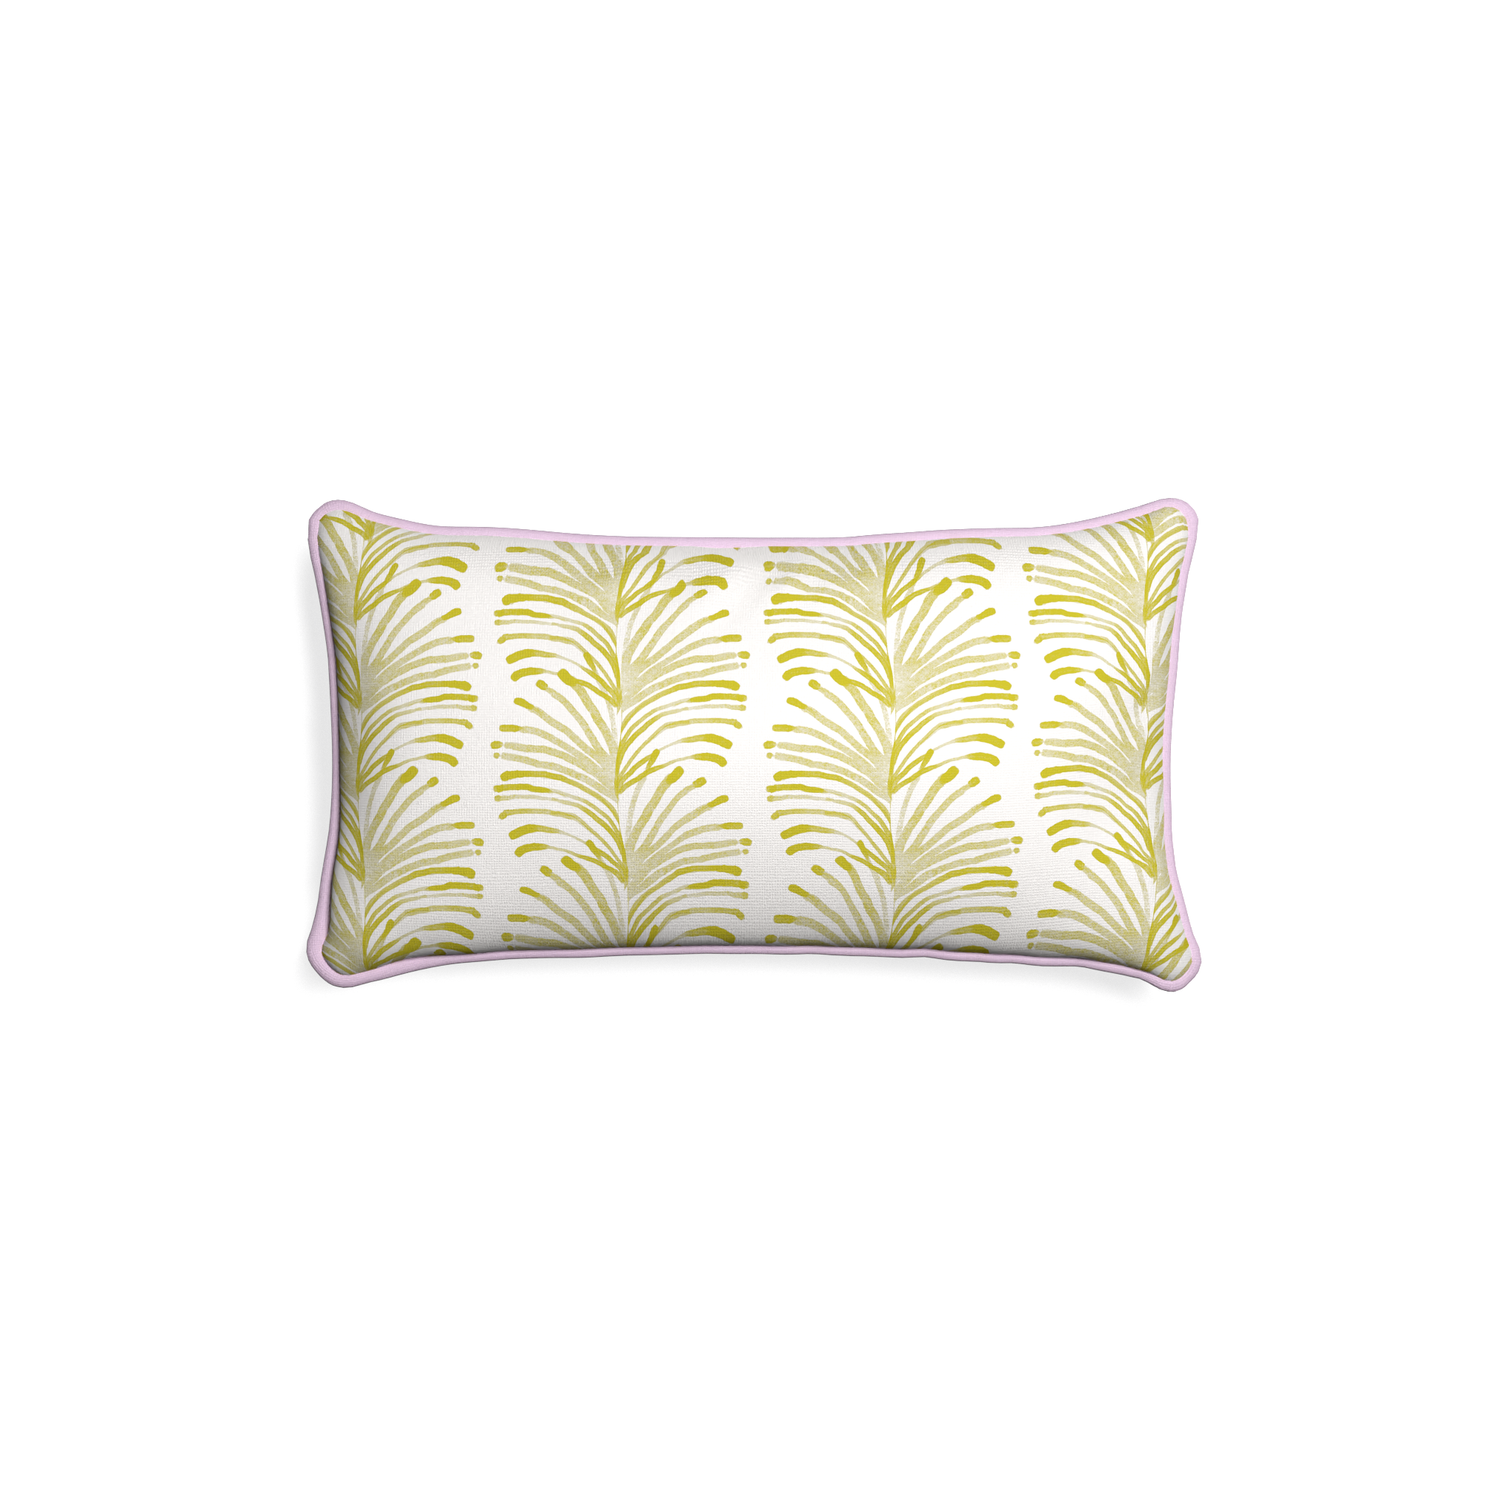 Petite-lumbar emma chartreuse custom yellow stripe chartreusepillow with l piping on white background